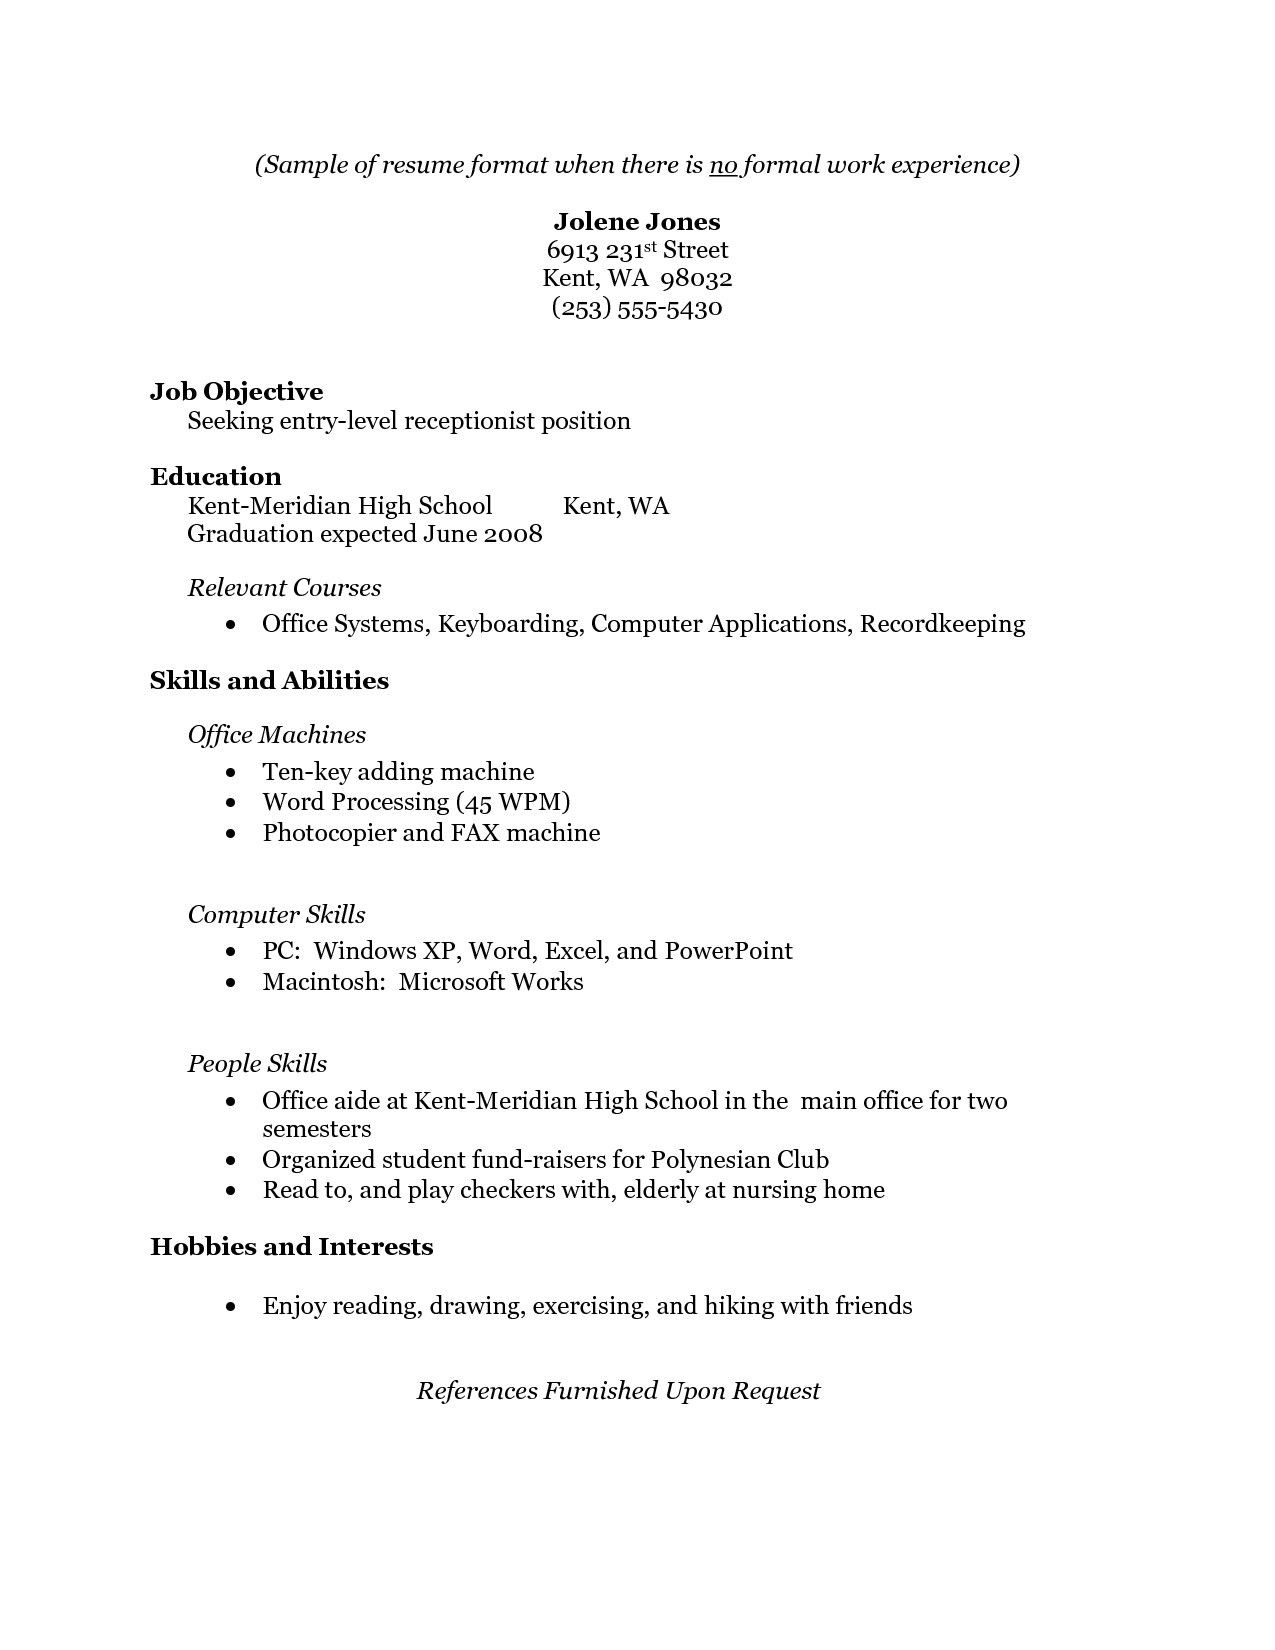 Free Resume Templates with No Work Experience Free Resume Templates No Work Experience #experience …